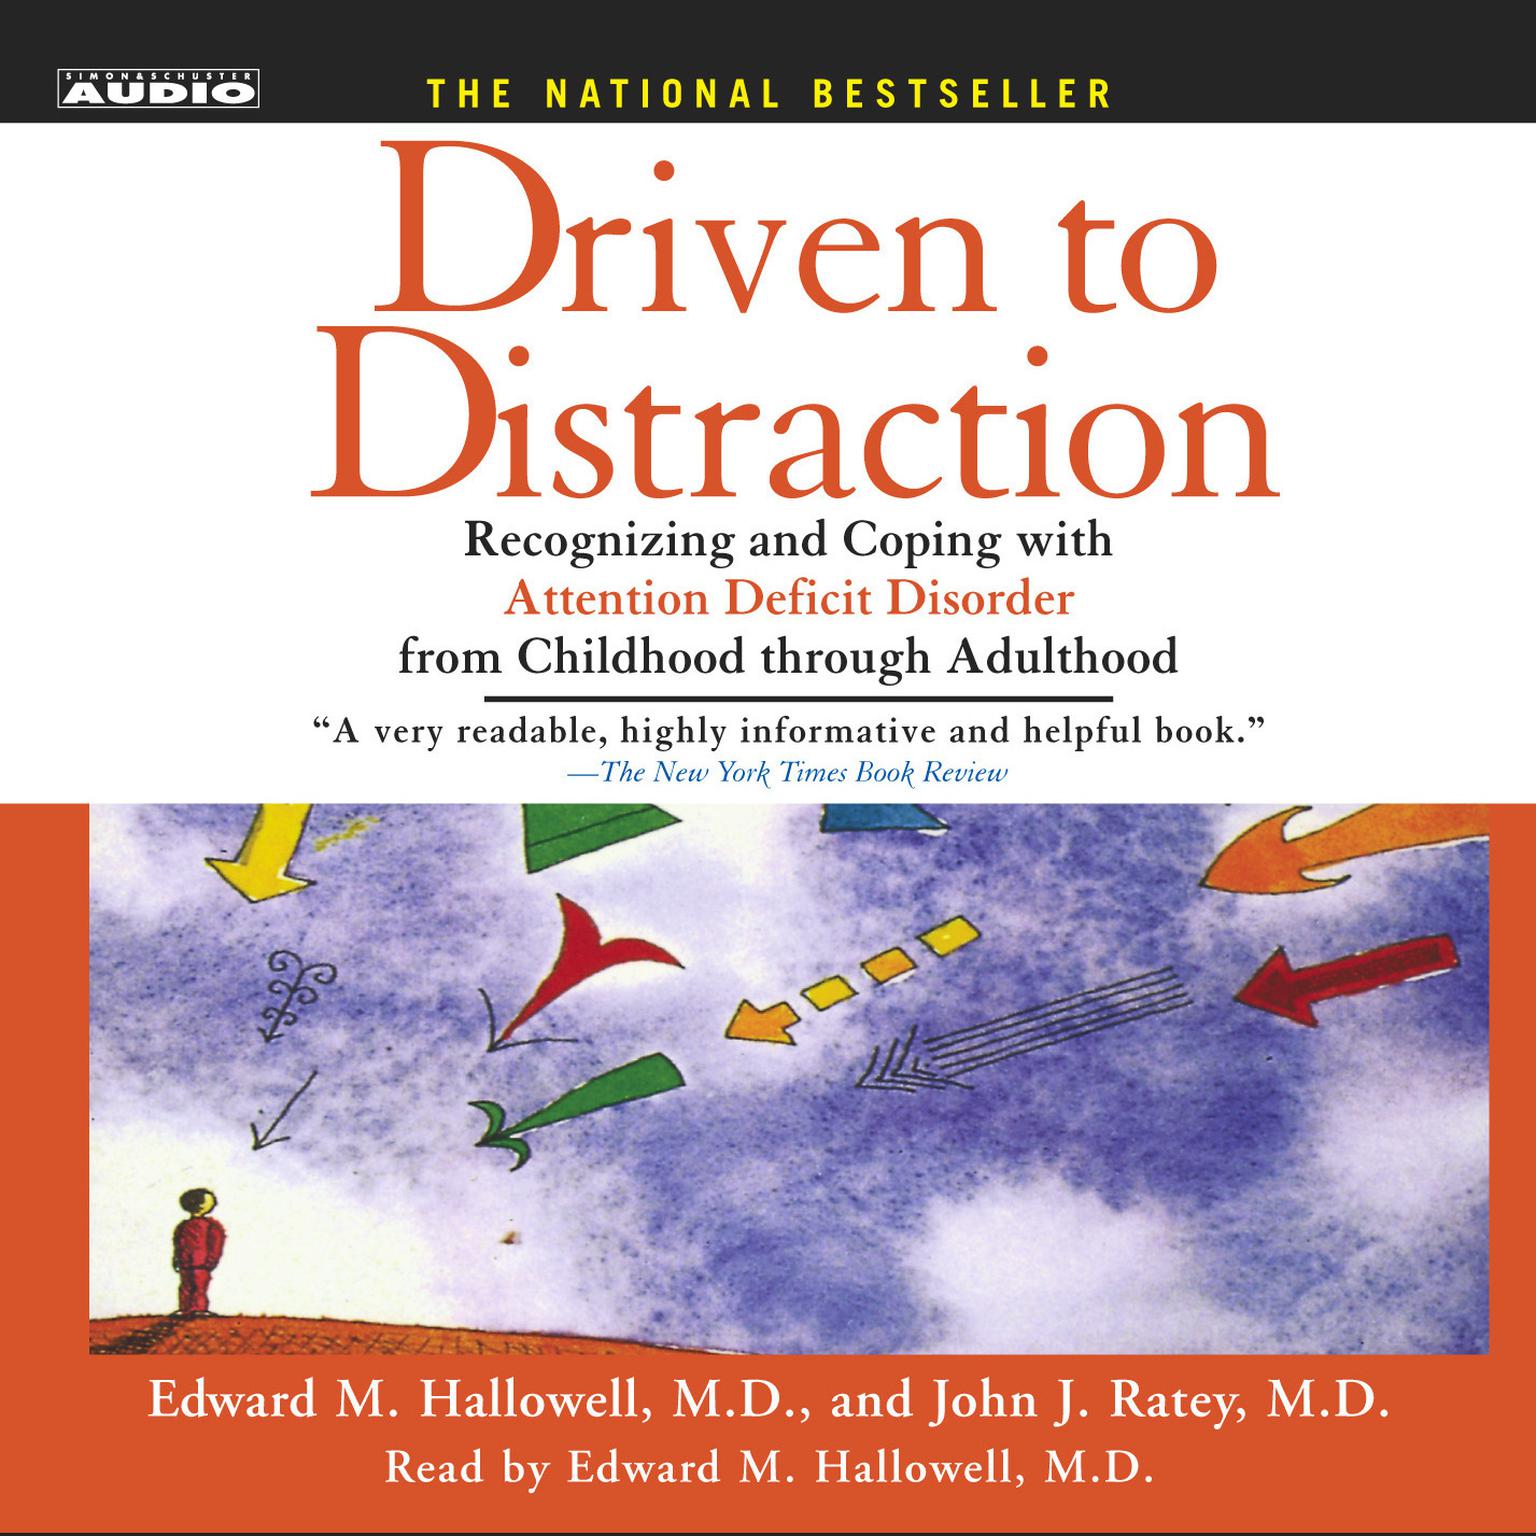 Driven to Distraction (Abridged): Recognizing and Coping with Attention Deficit Disorder from Childhood Through Adulthood Audiobook, by John J. Ratey